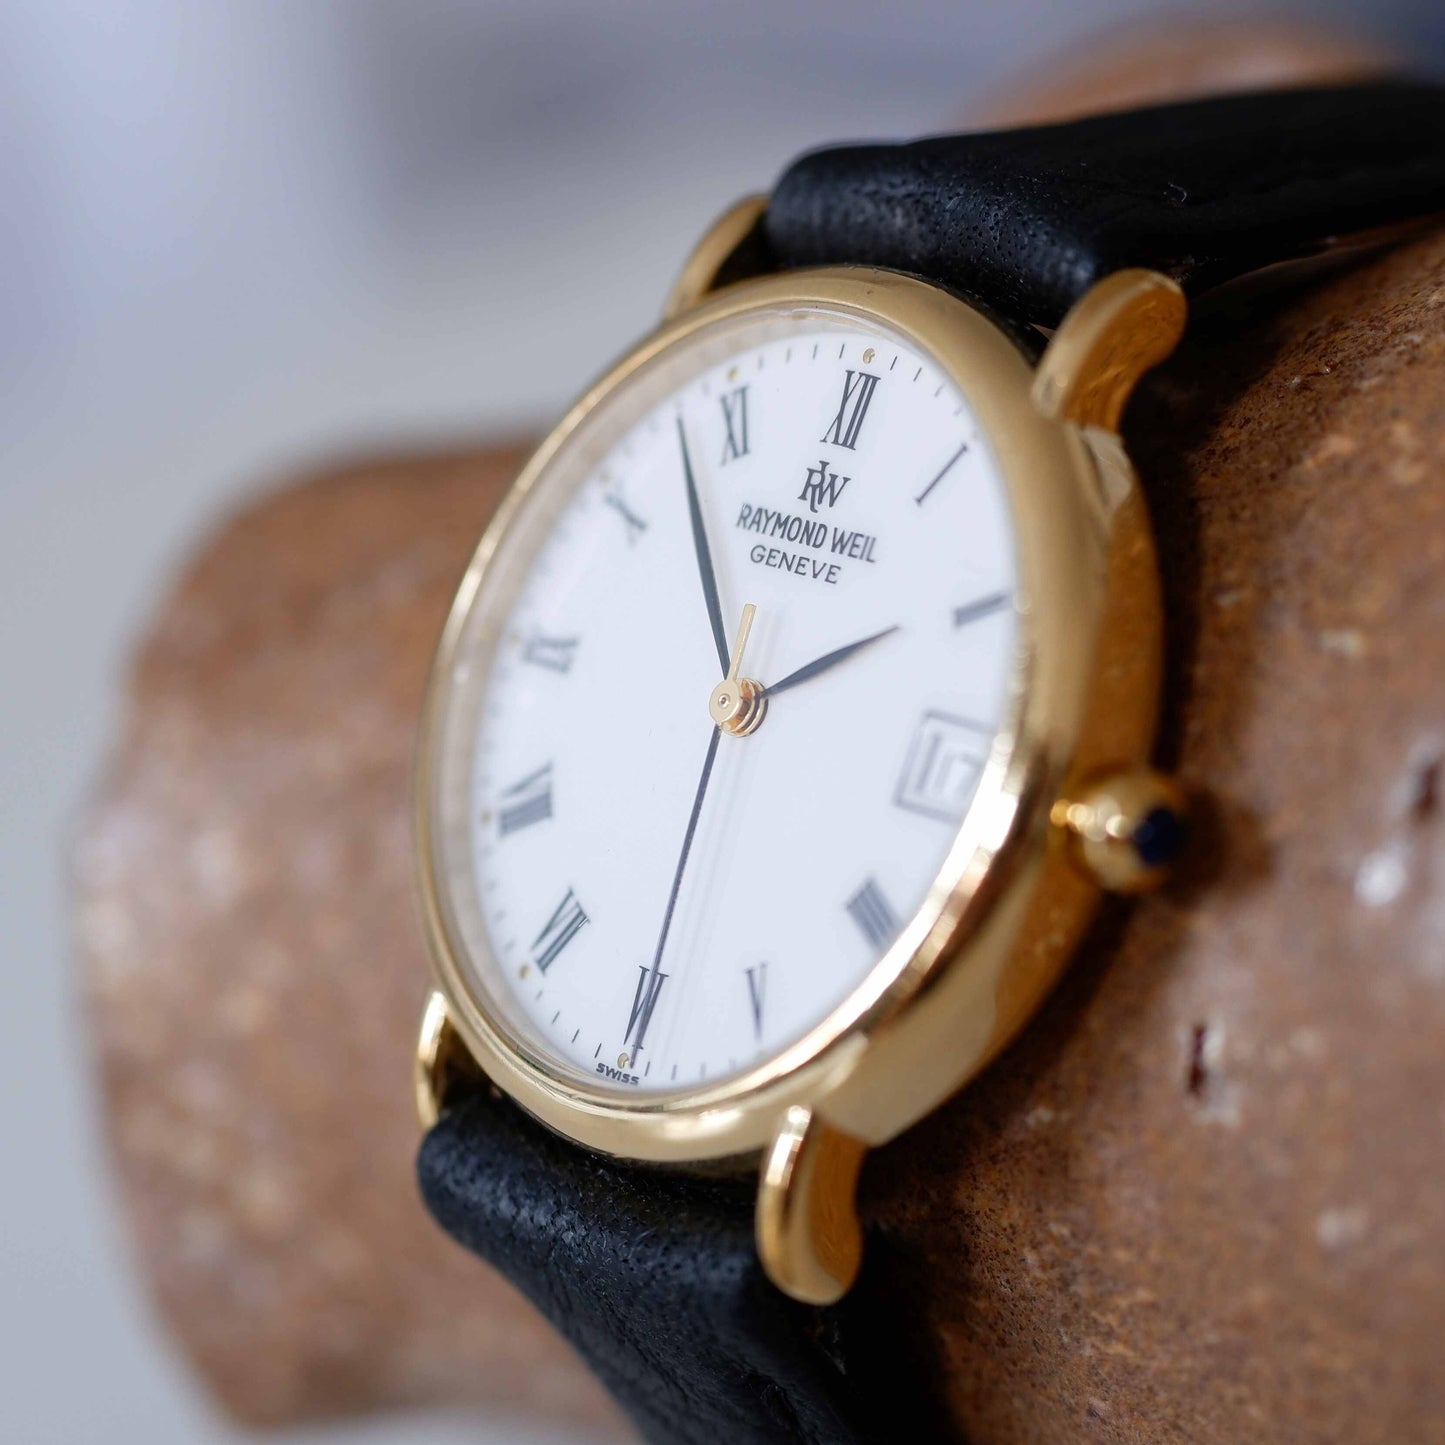 Raymond Weil Vintage Ladies Watch: 90s Golden Icon with Roman Numerals | Slight Right Side